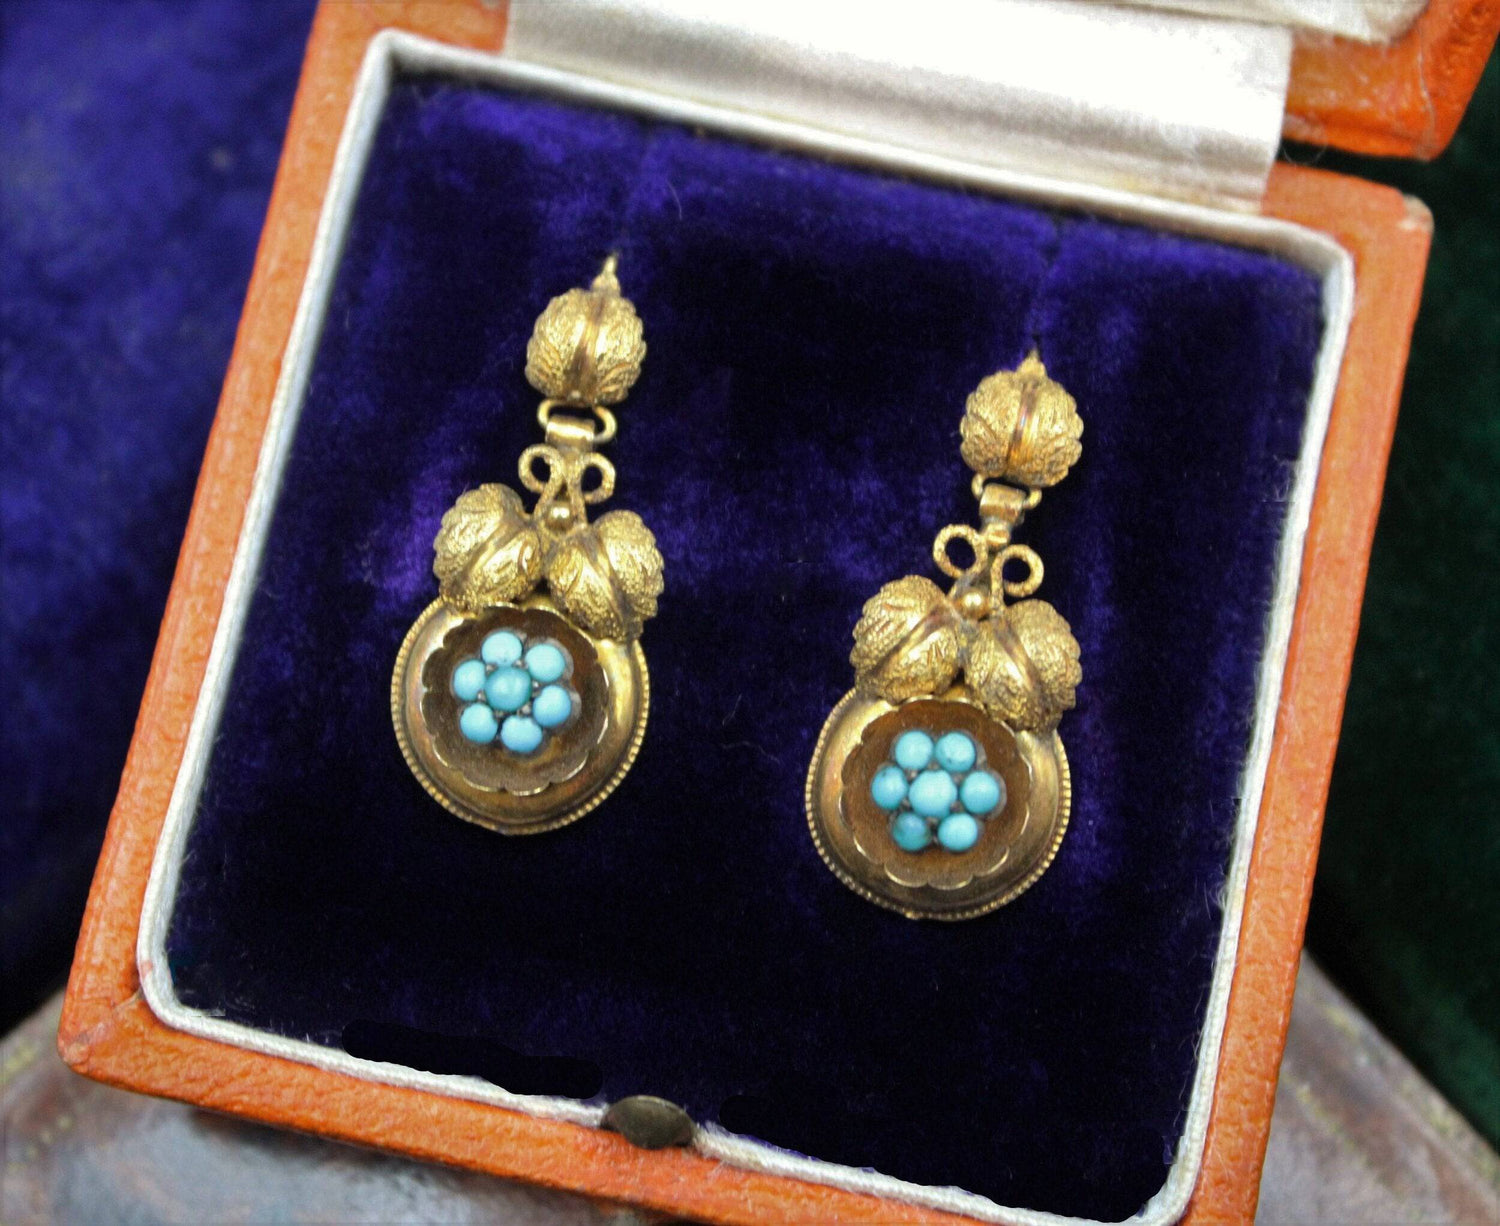 A fine pair of Victorian Foliate Drop Turquoise Earrings in High Carat Yellow Gold, English, Circa 1870 - Robin Haydock Antiques